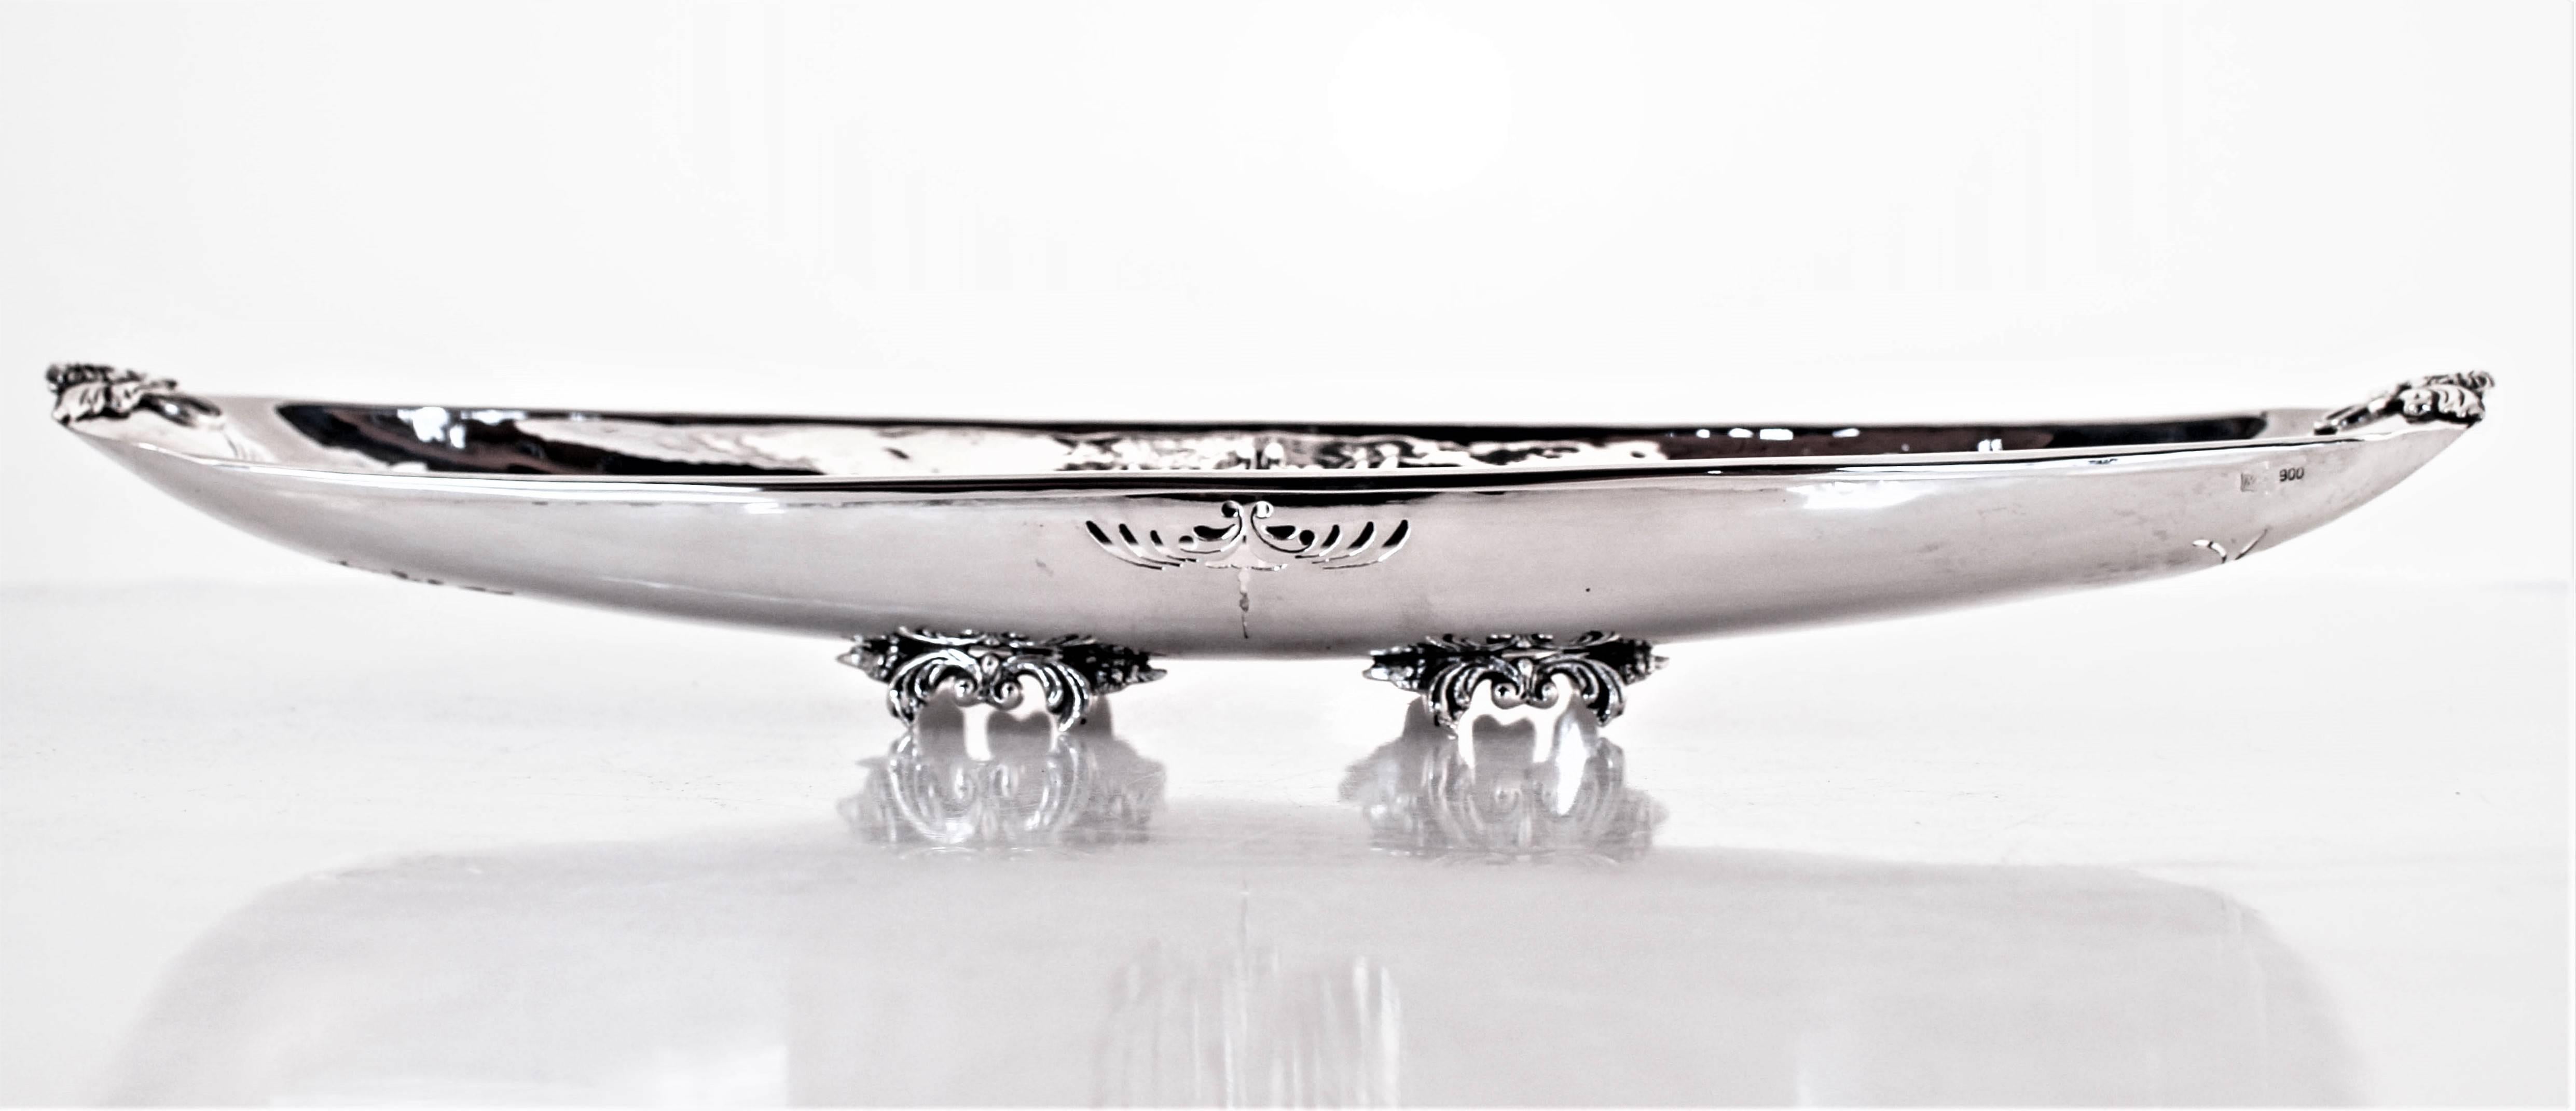 If you’re looking for something different or unique, read on because this piece is unusual. A very long and narrow dish that stands on four legs. It has a light touch of hammering and pierced work on each end. It would be perfect filled with bonbons